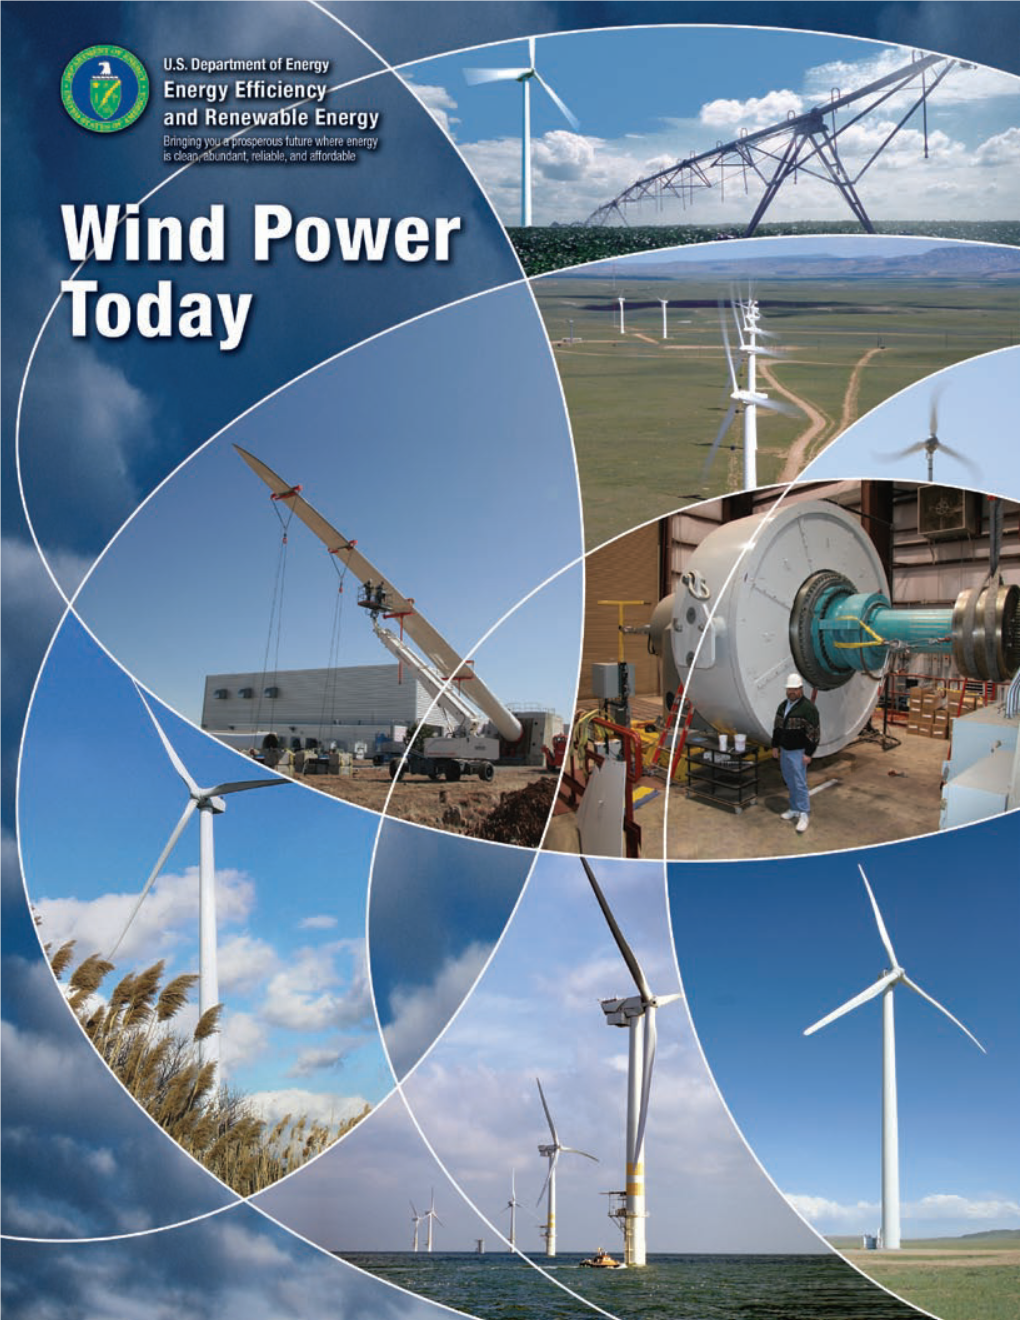 Wind Power Today